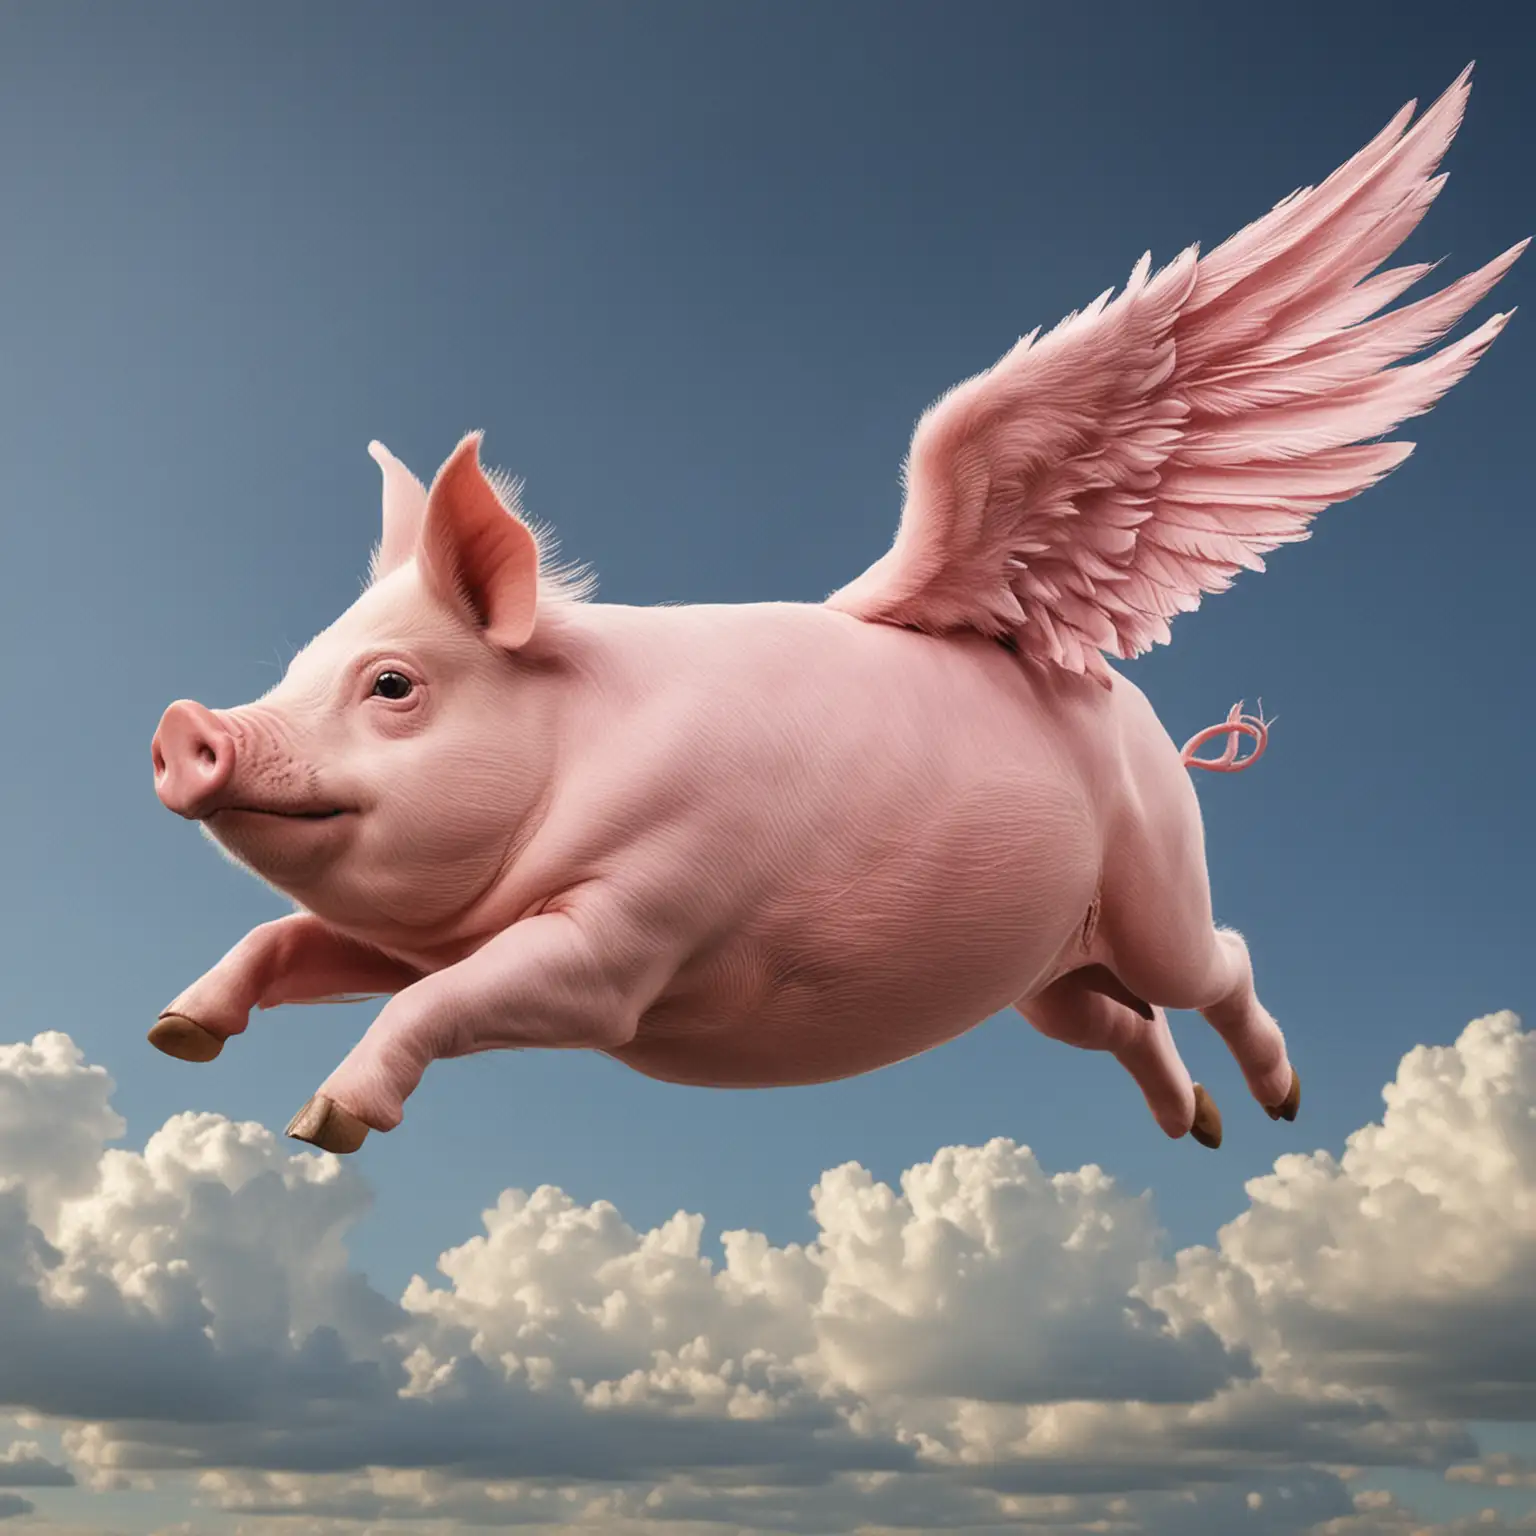 Whimsical-Flying-Pig-in-Surreal-Sky